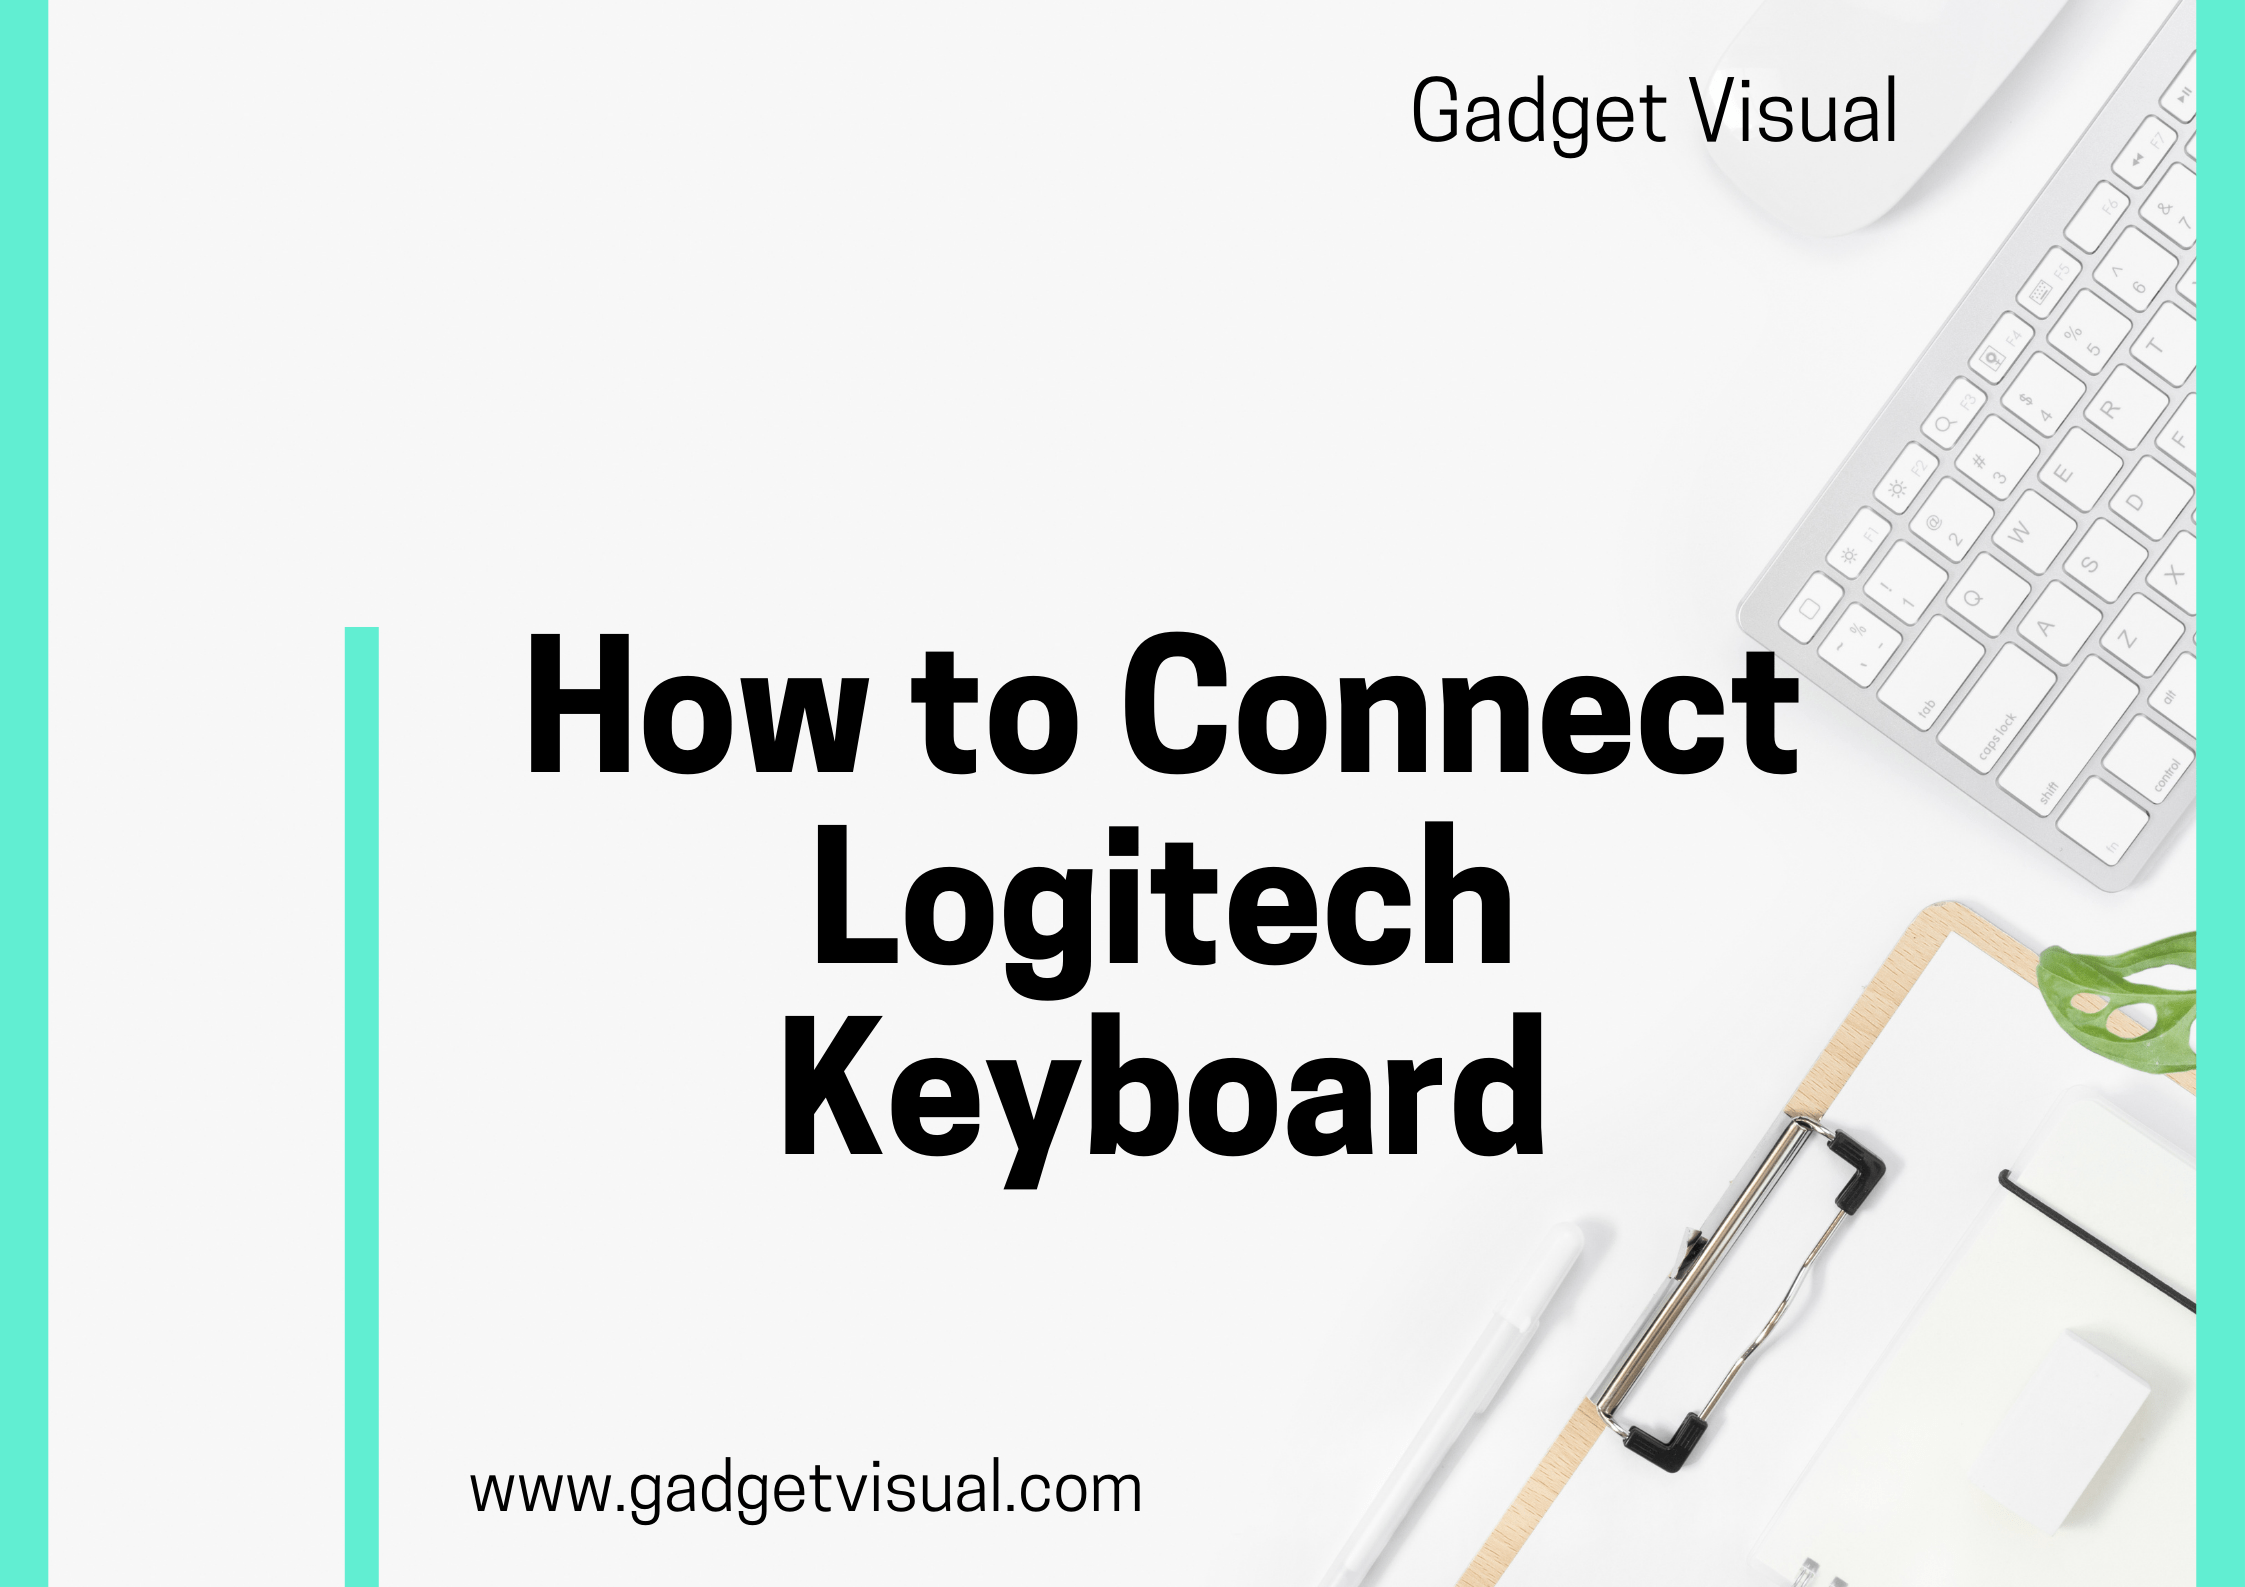 How to Connect Logitech Keyboard